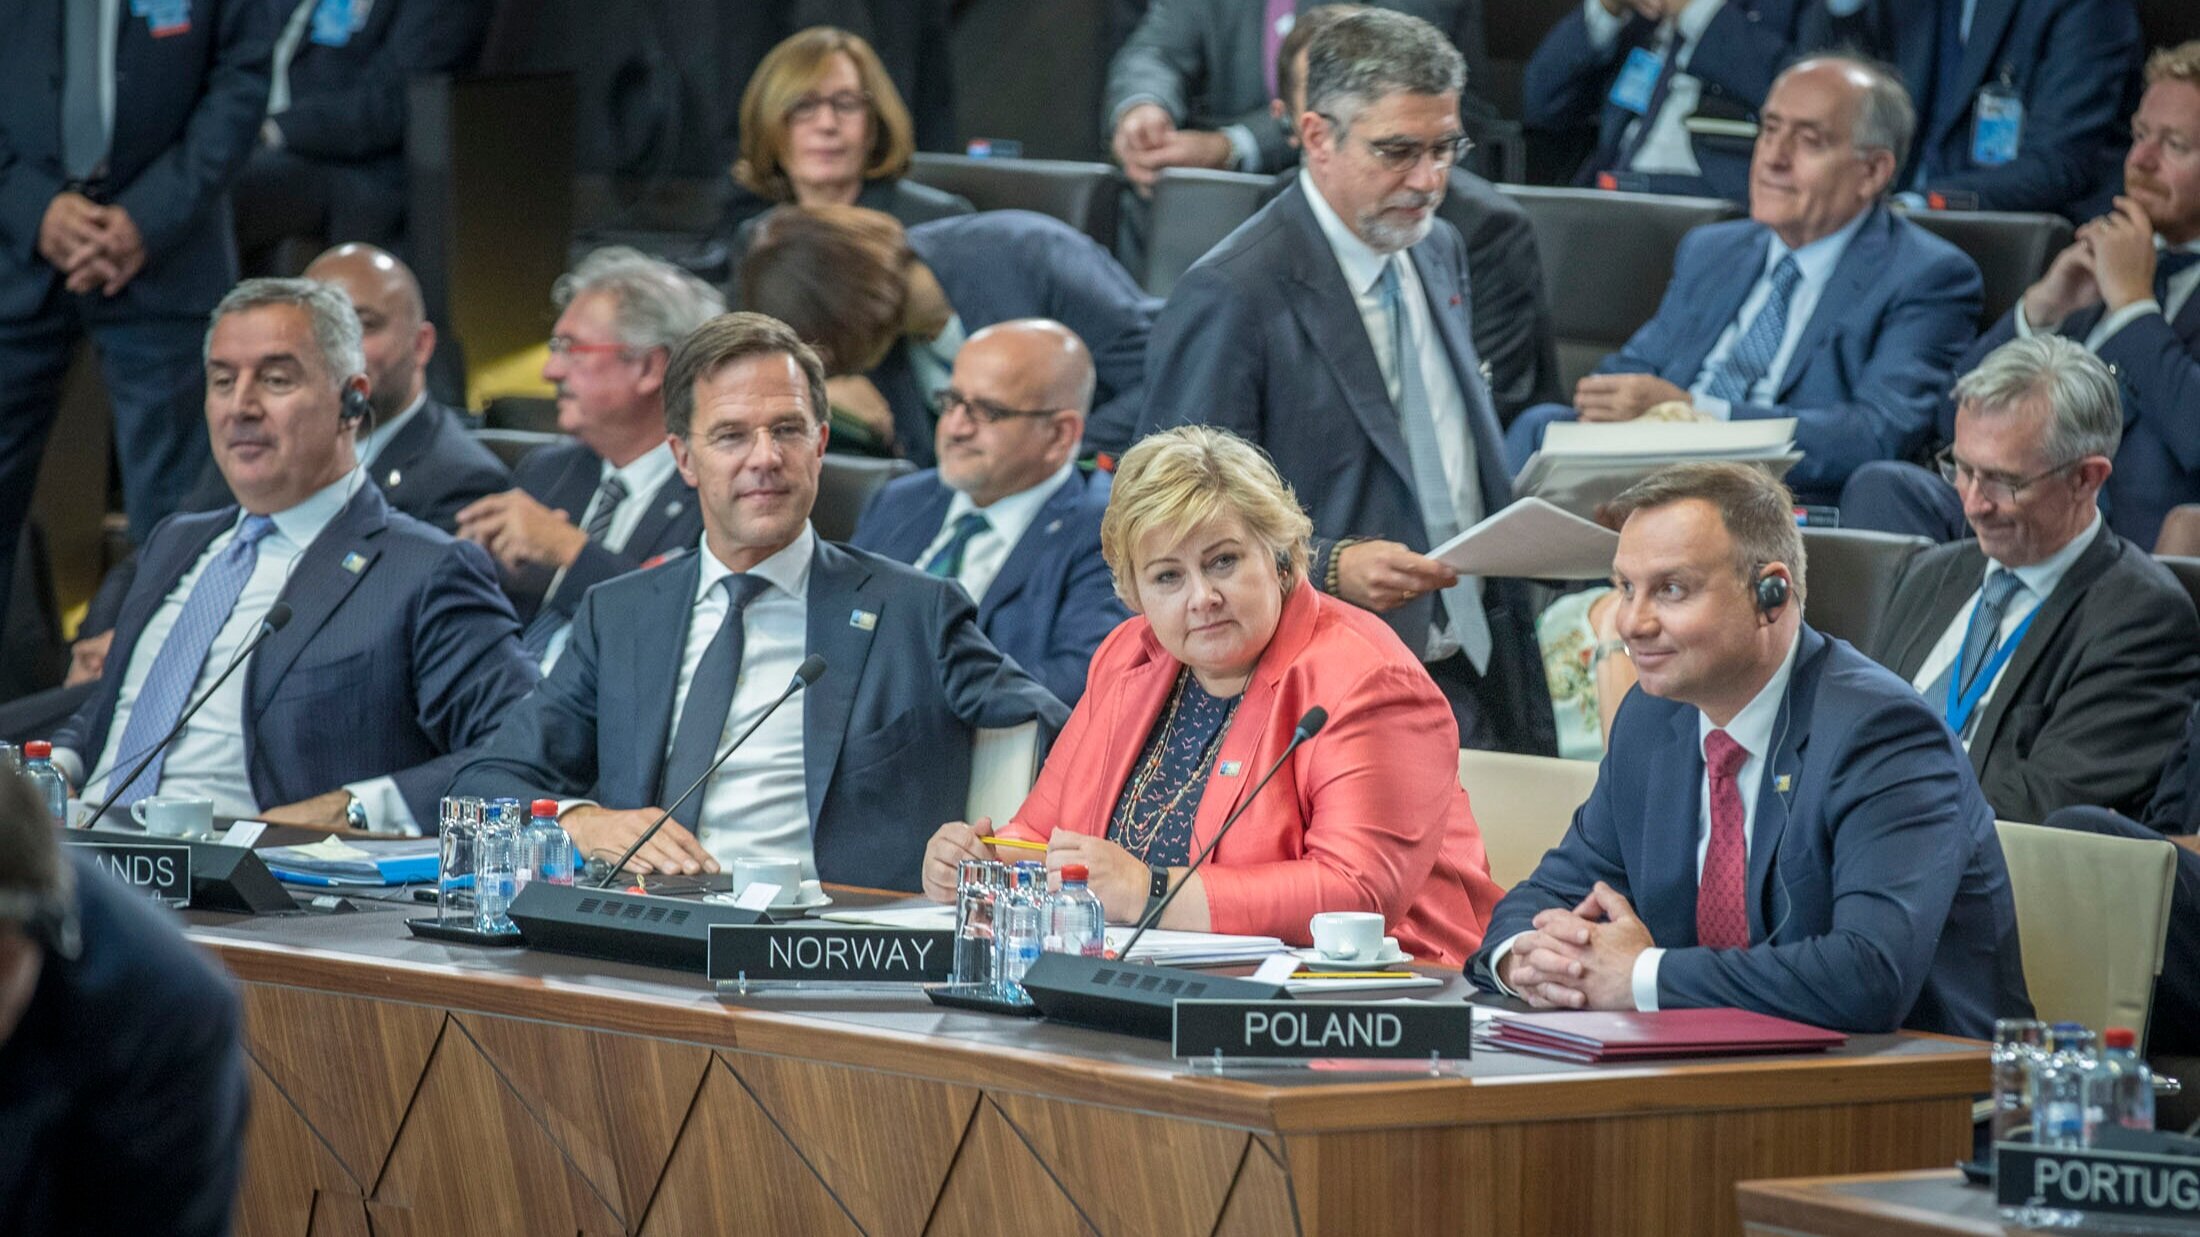   Photos provided by Televic, of the first North Atlantic Council meeting at the new NATO HQ in Brussels, May 9, 2018, using Televic Conference Equipment. Used with permission.  